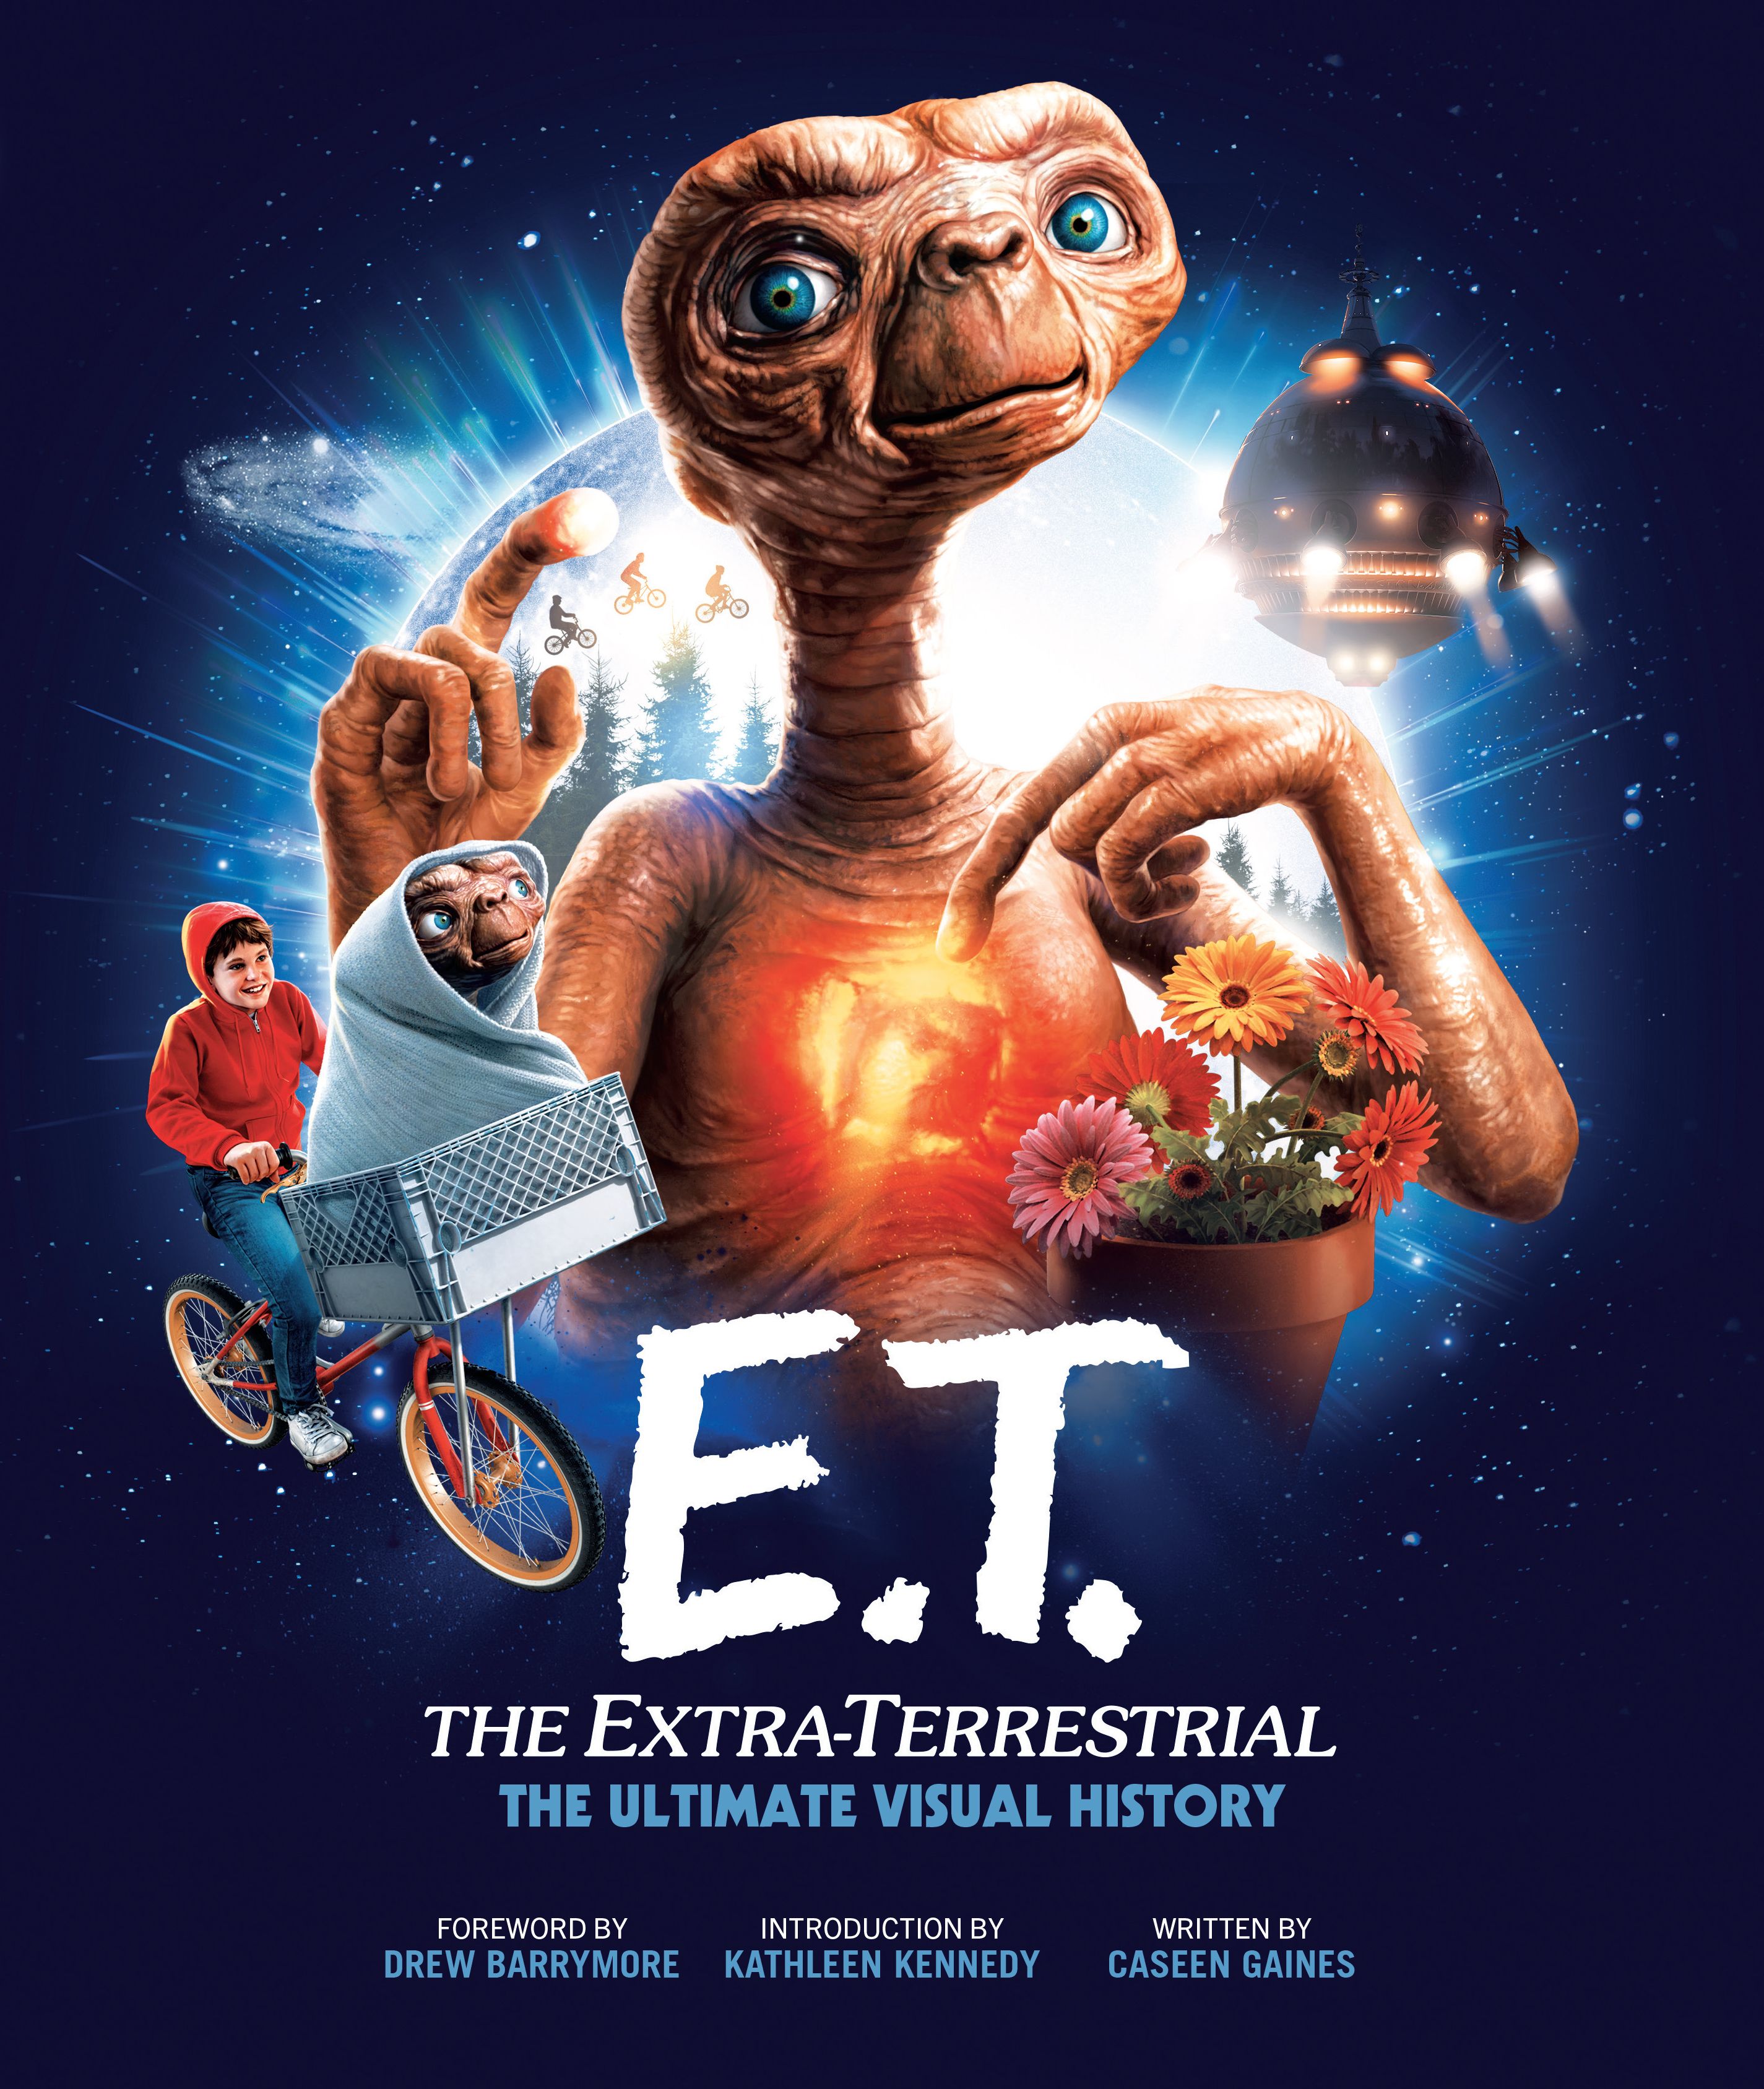 E.T. The Extra-Terrestrial Phones Home In New Visual History [Exclusive]